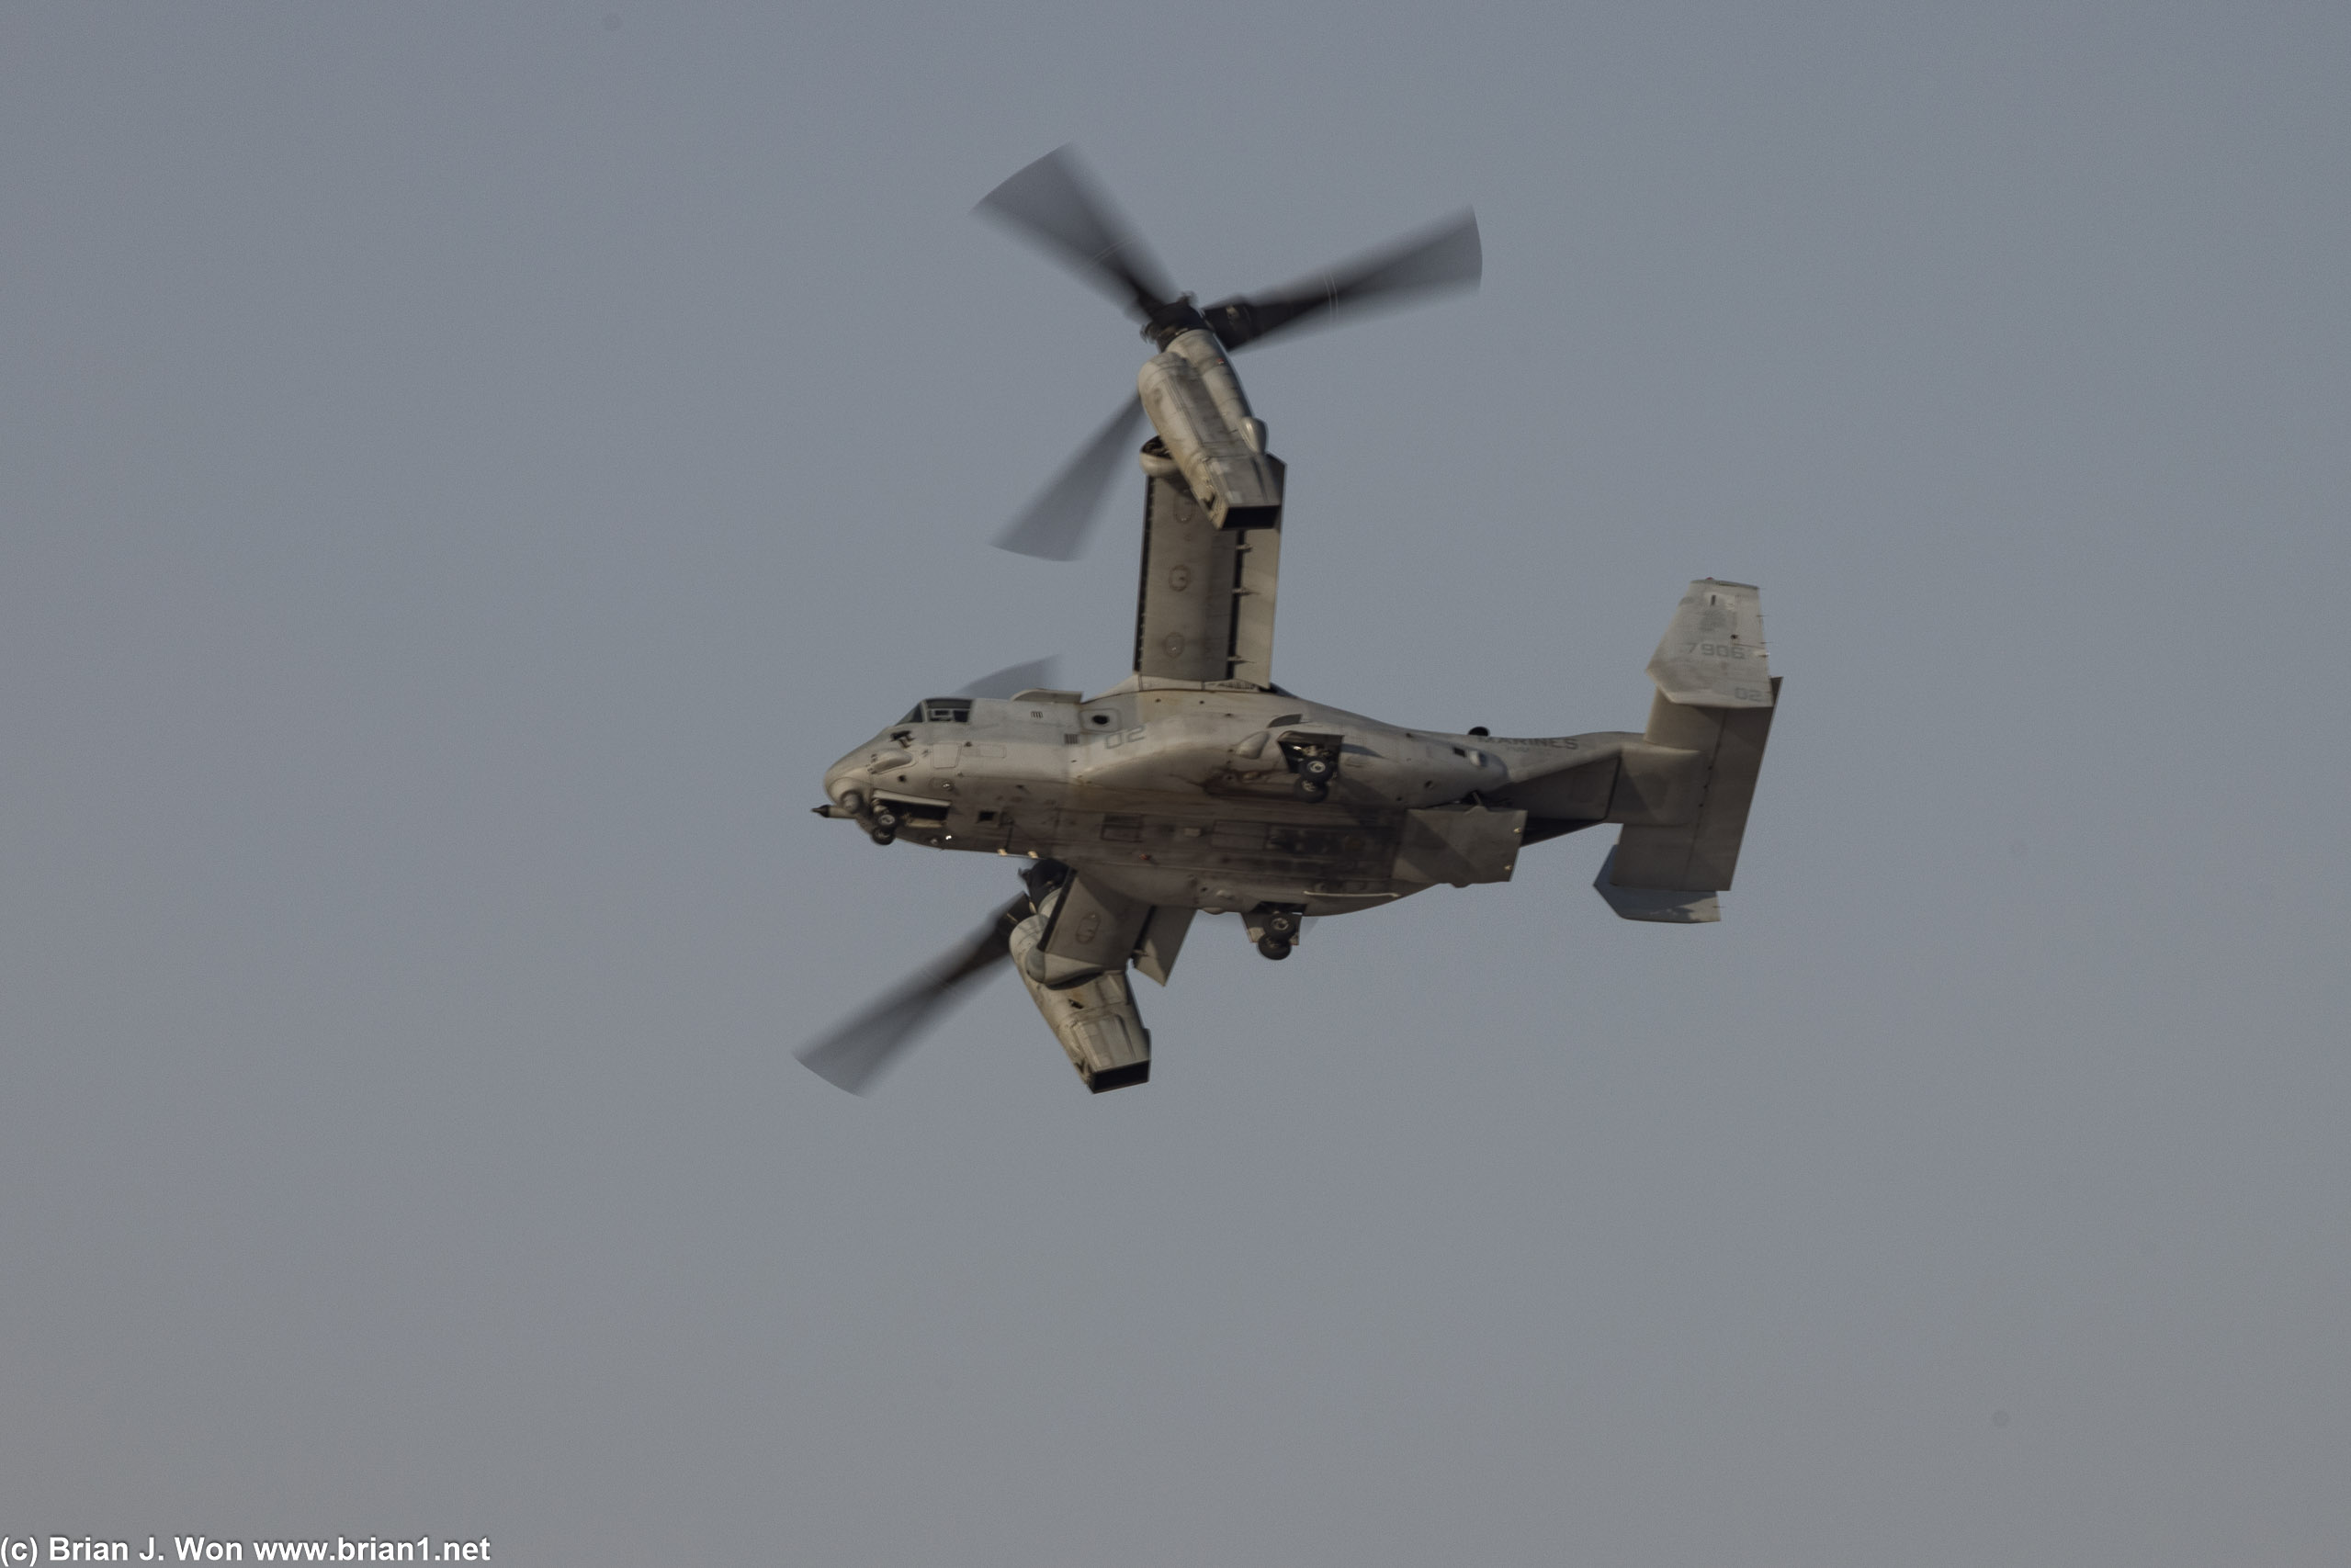 Boeing V-22 Osprey. Trying to get a sharp image with the rotors blurred was tough.